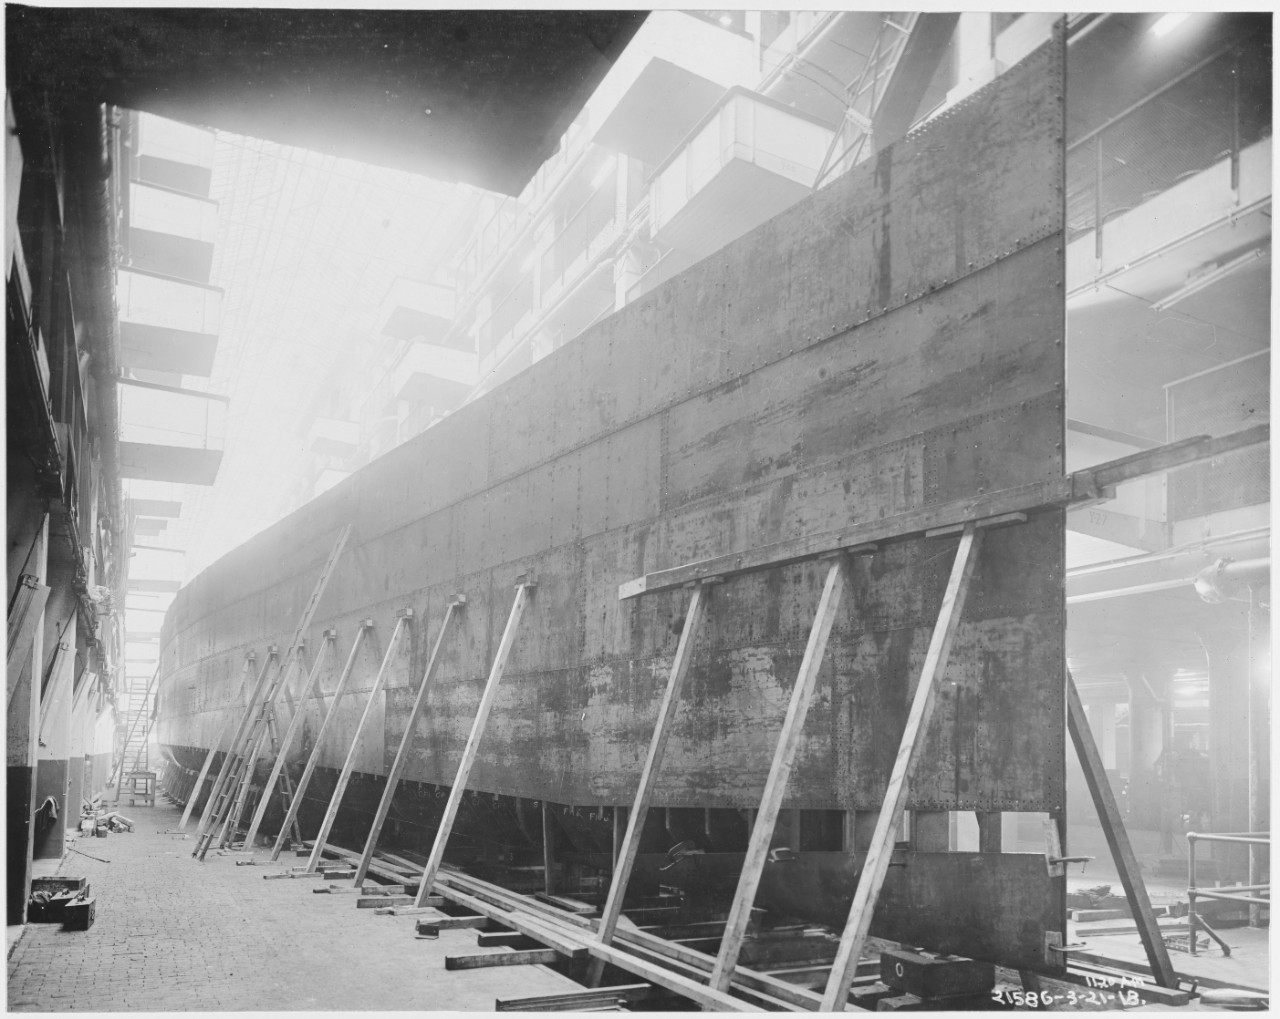 Construction of Ford Eagle Boats, Ford Motor Company, March 21, 1918